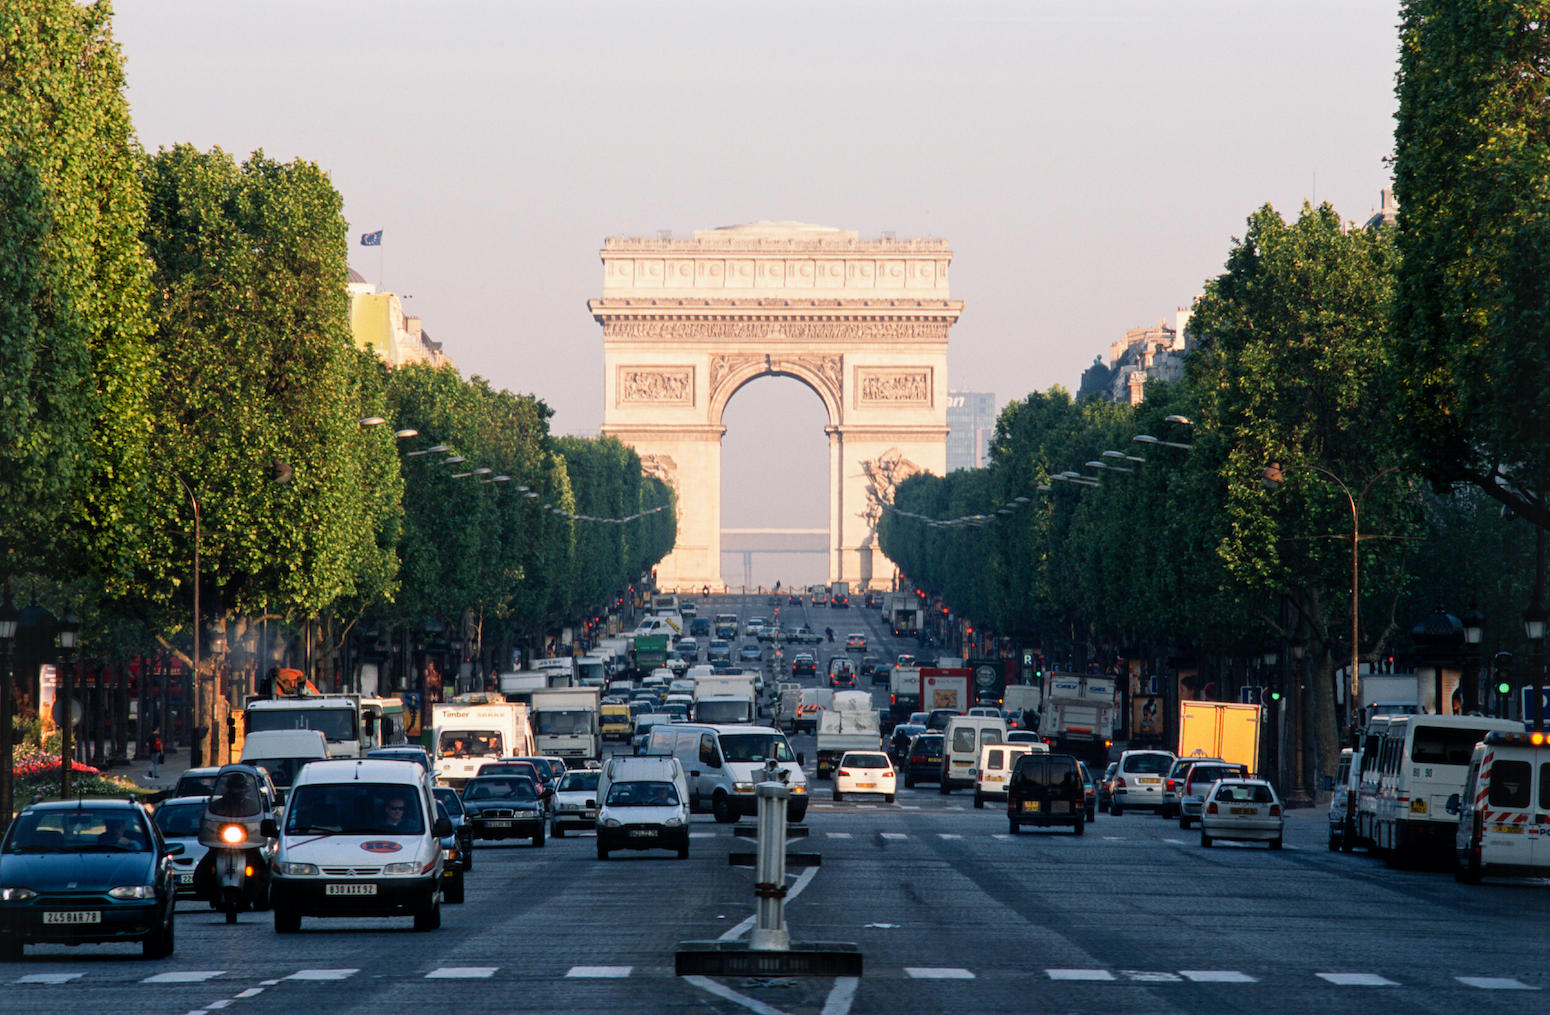 Champs-Elysees with view of the Arc de Triomphe in Paris, France